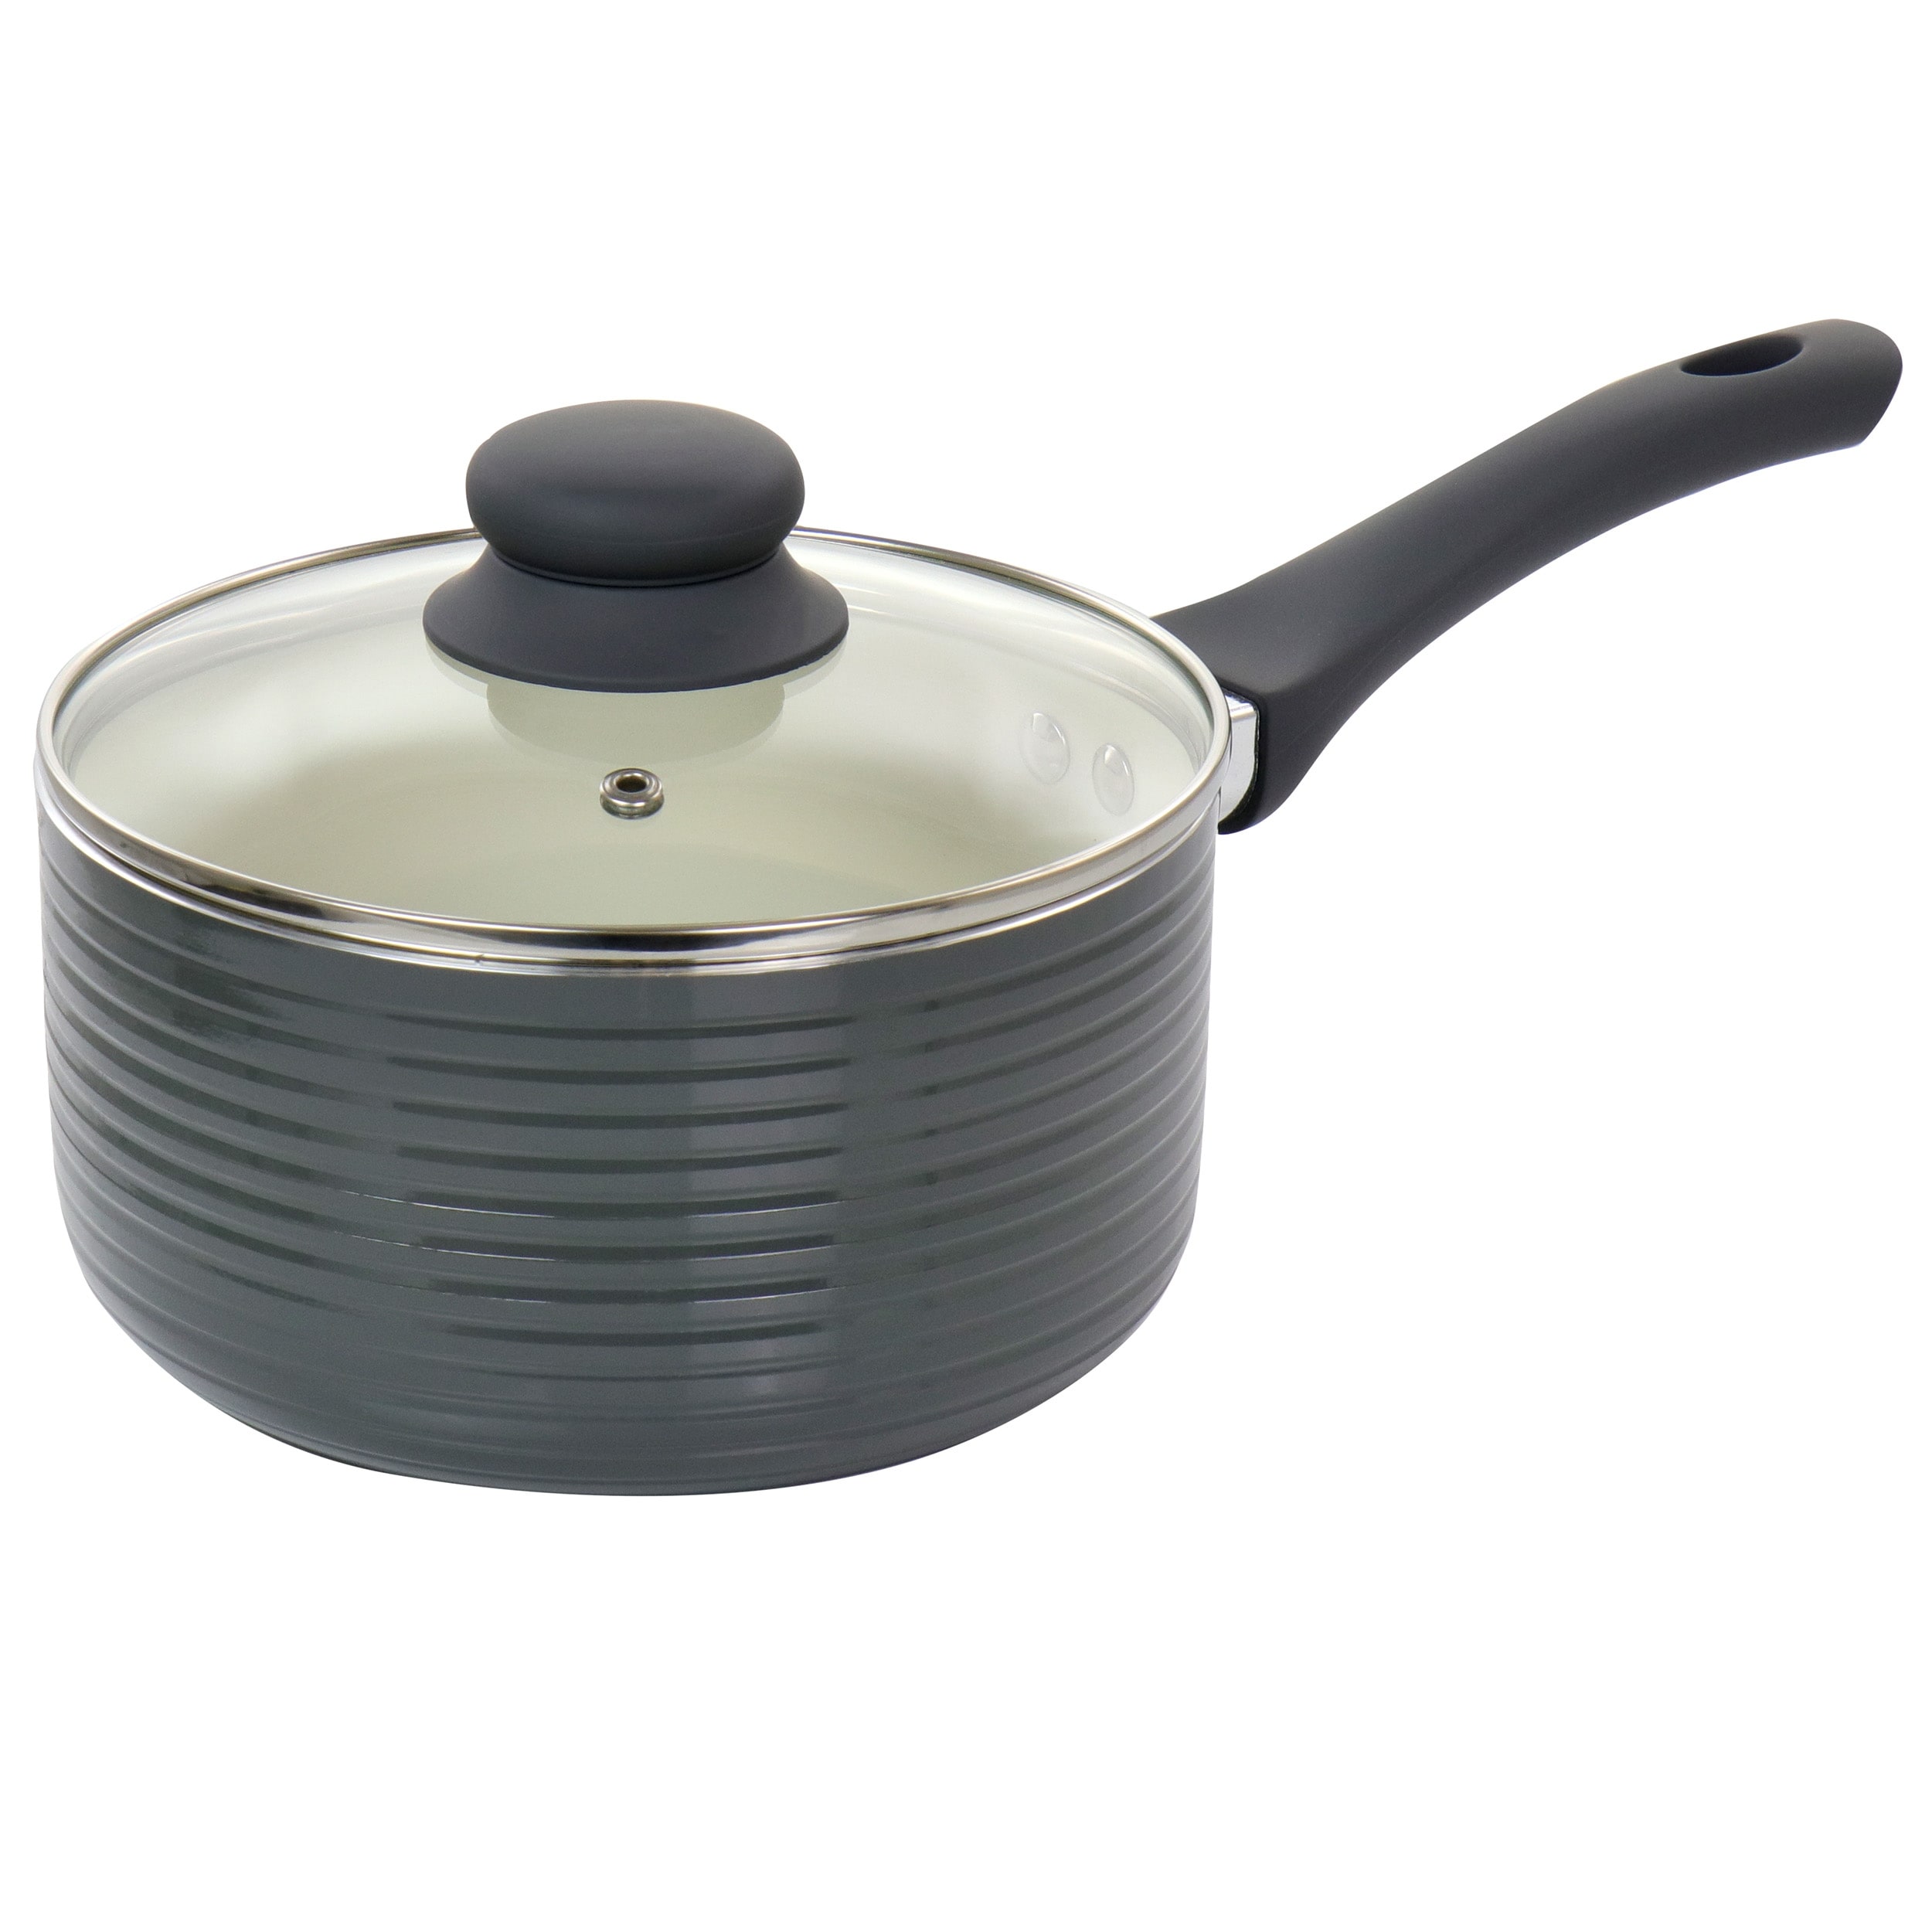 https://ak1.ostkcdn.com/images/products/is/images/direct/d78451e3b739d64d8eb202d9a7d7d86ee73a1f55/Oster-2.5-Quart-Nonstick-Aluminum-Saucepan-with-Lid-in-Gray.jpg